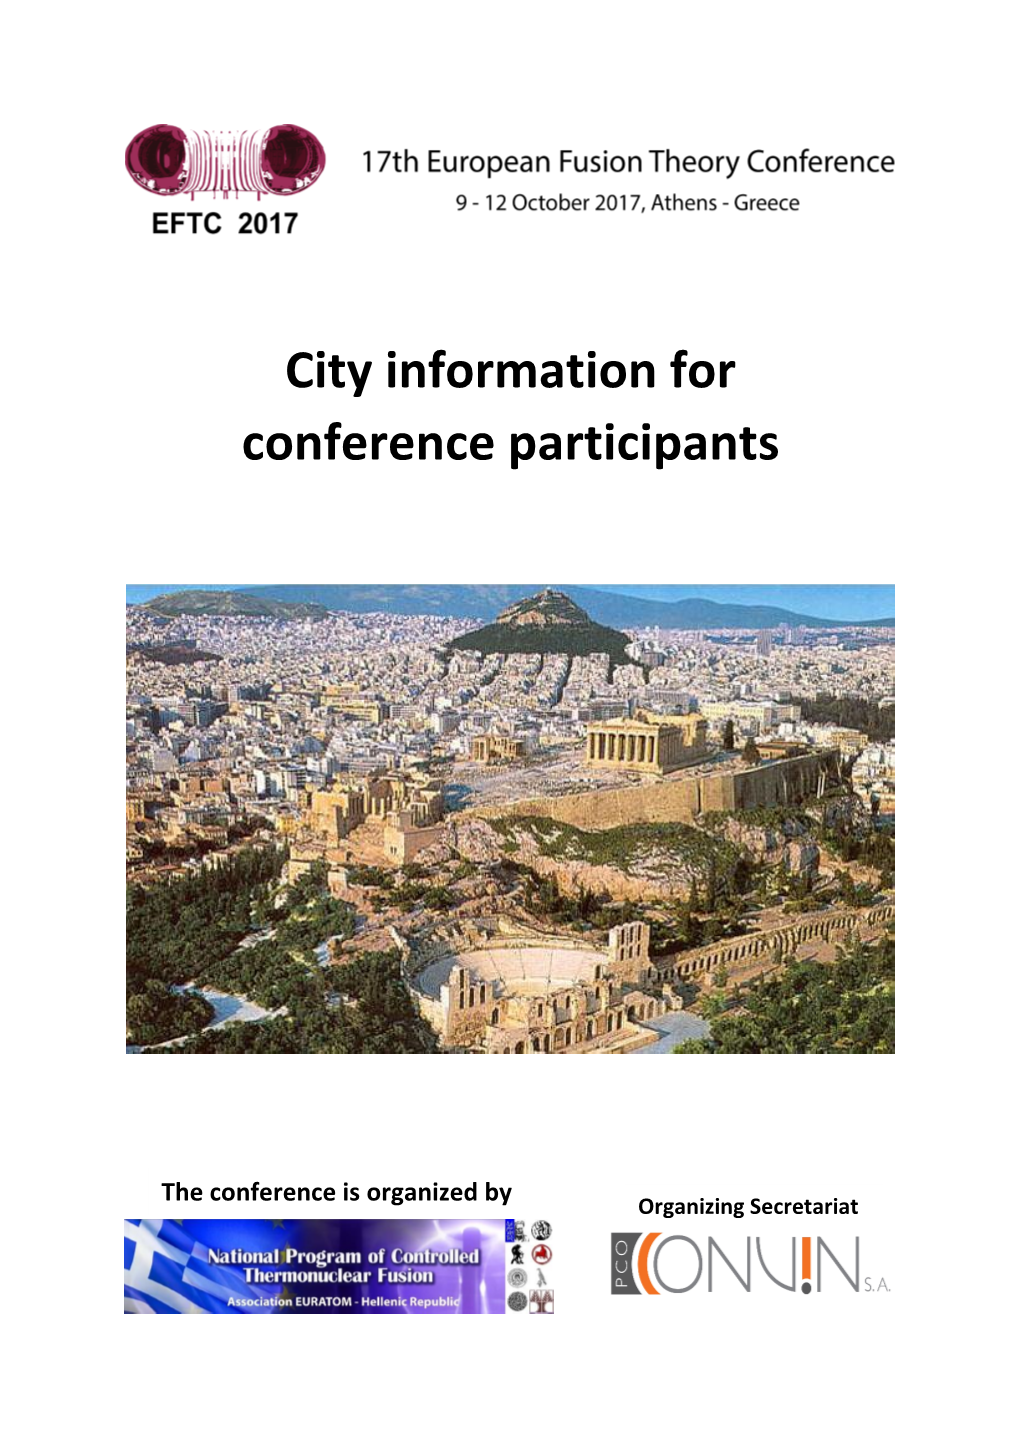 City Information for Conference Participants